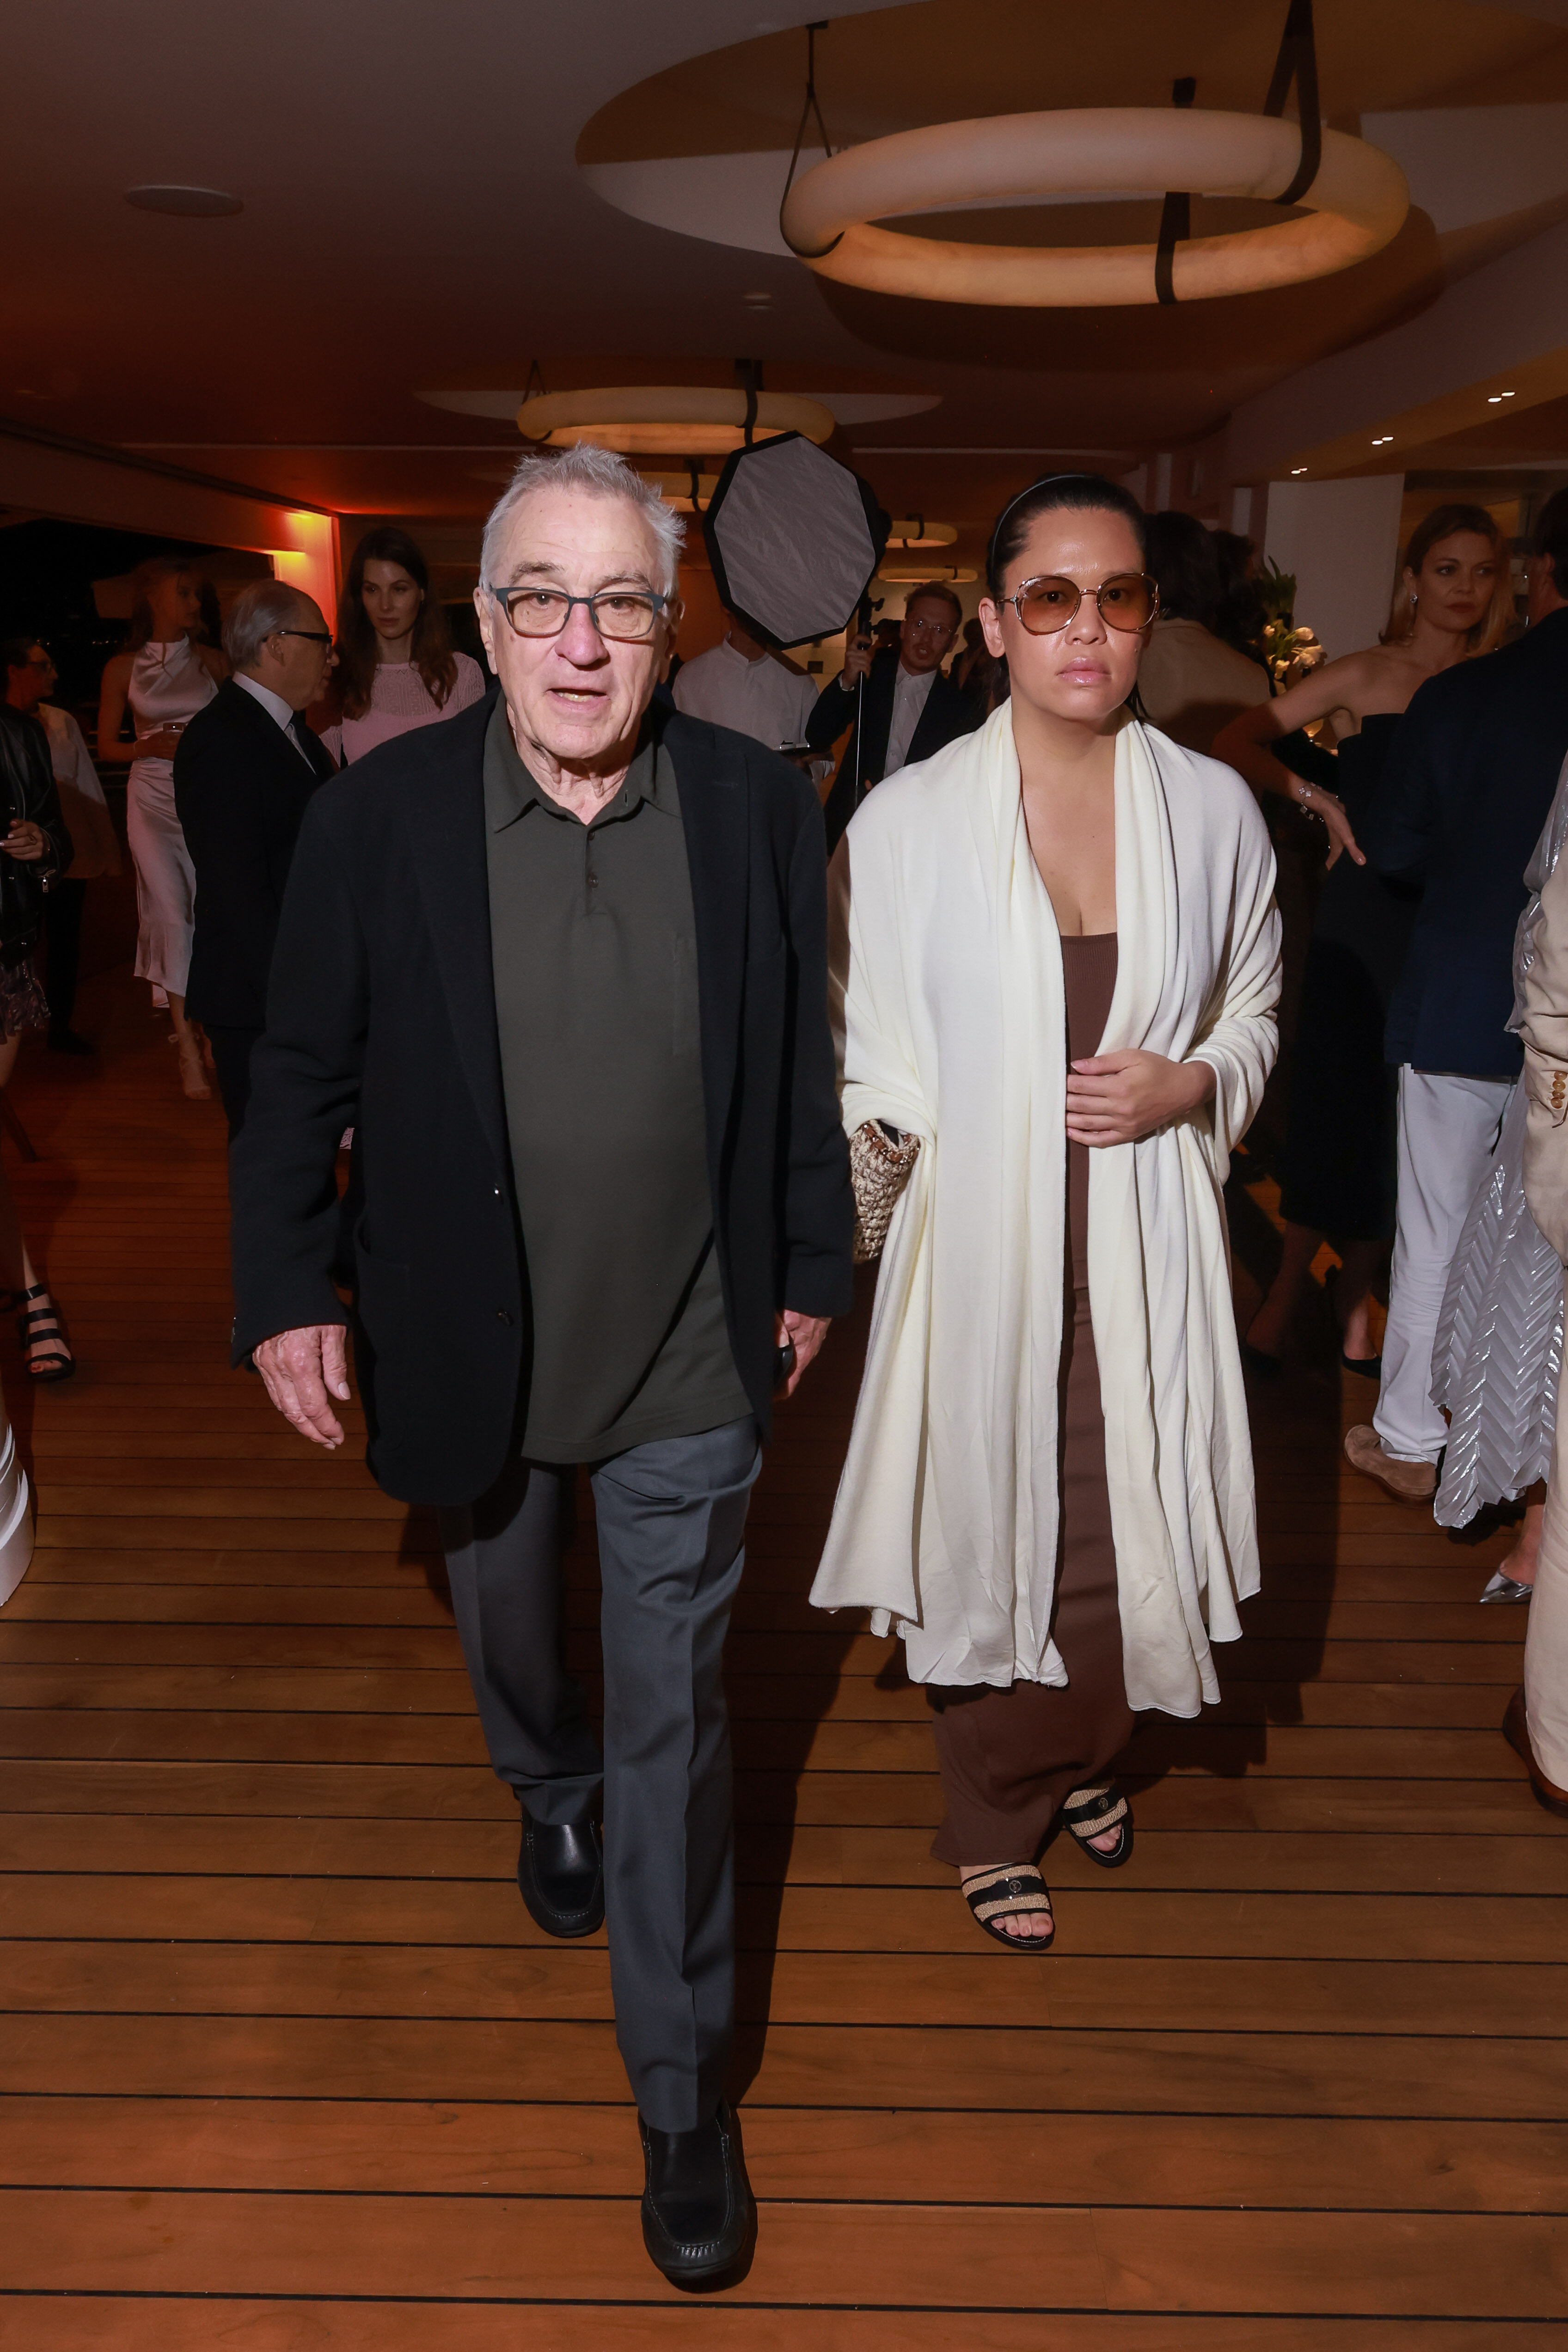 Tiffany Chen and Robert De Niro at the Cannes Film Festival Air Mail /Warner Brothers Discovery Party at Hotel du Cap-Eden-Roc on May 23, 2023 in Cap d'Antibes, France. | Source: Getty Images